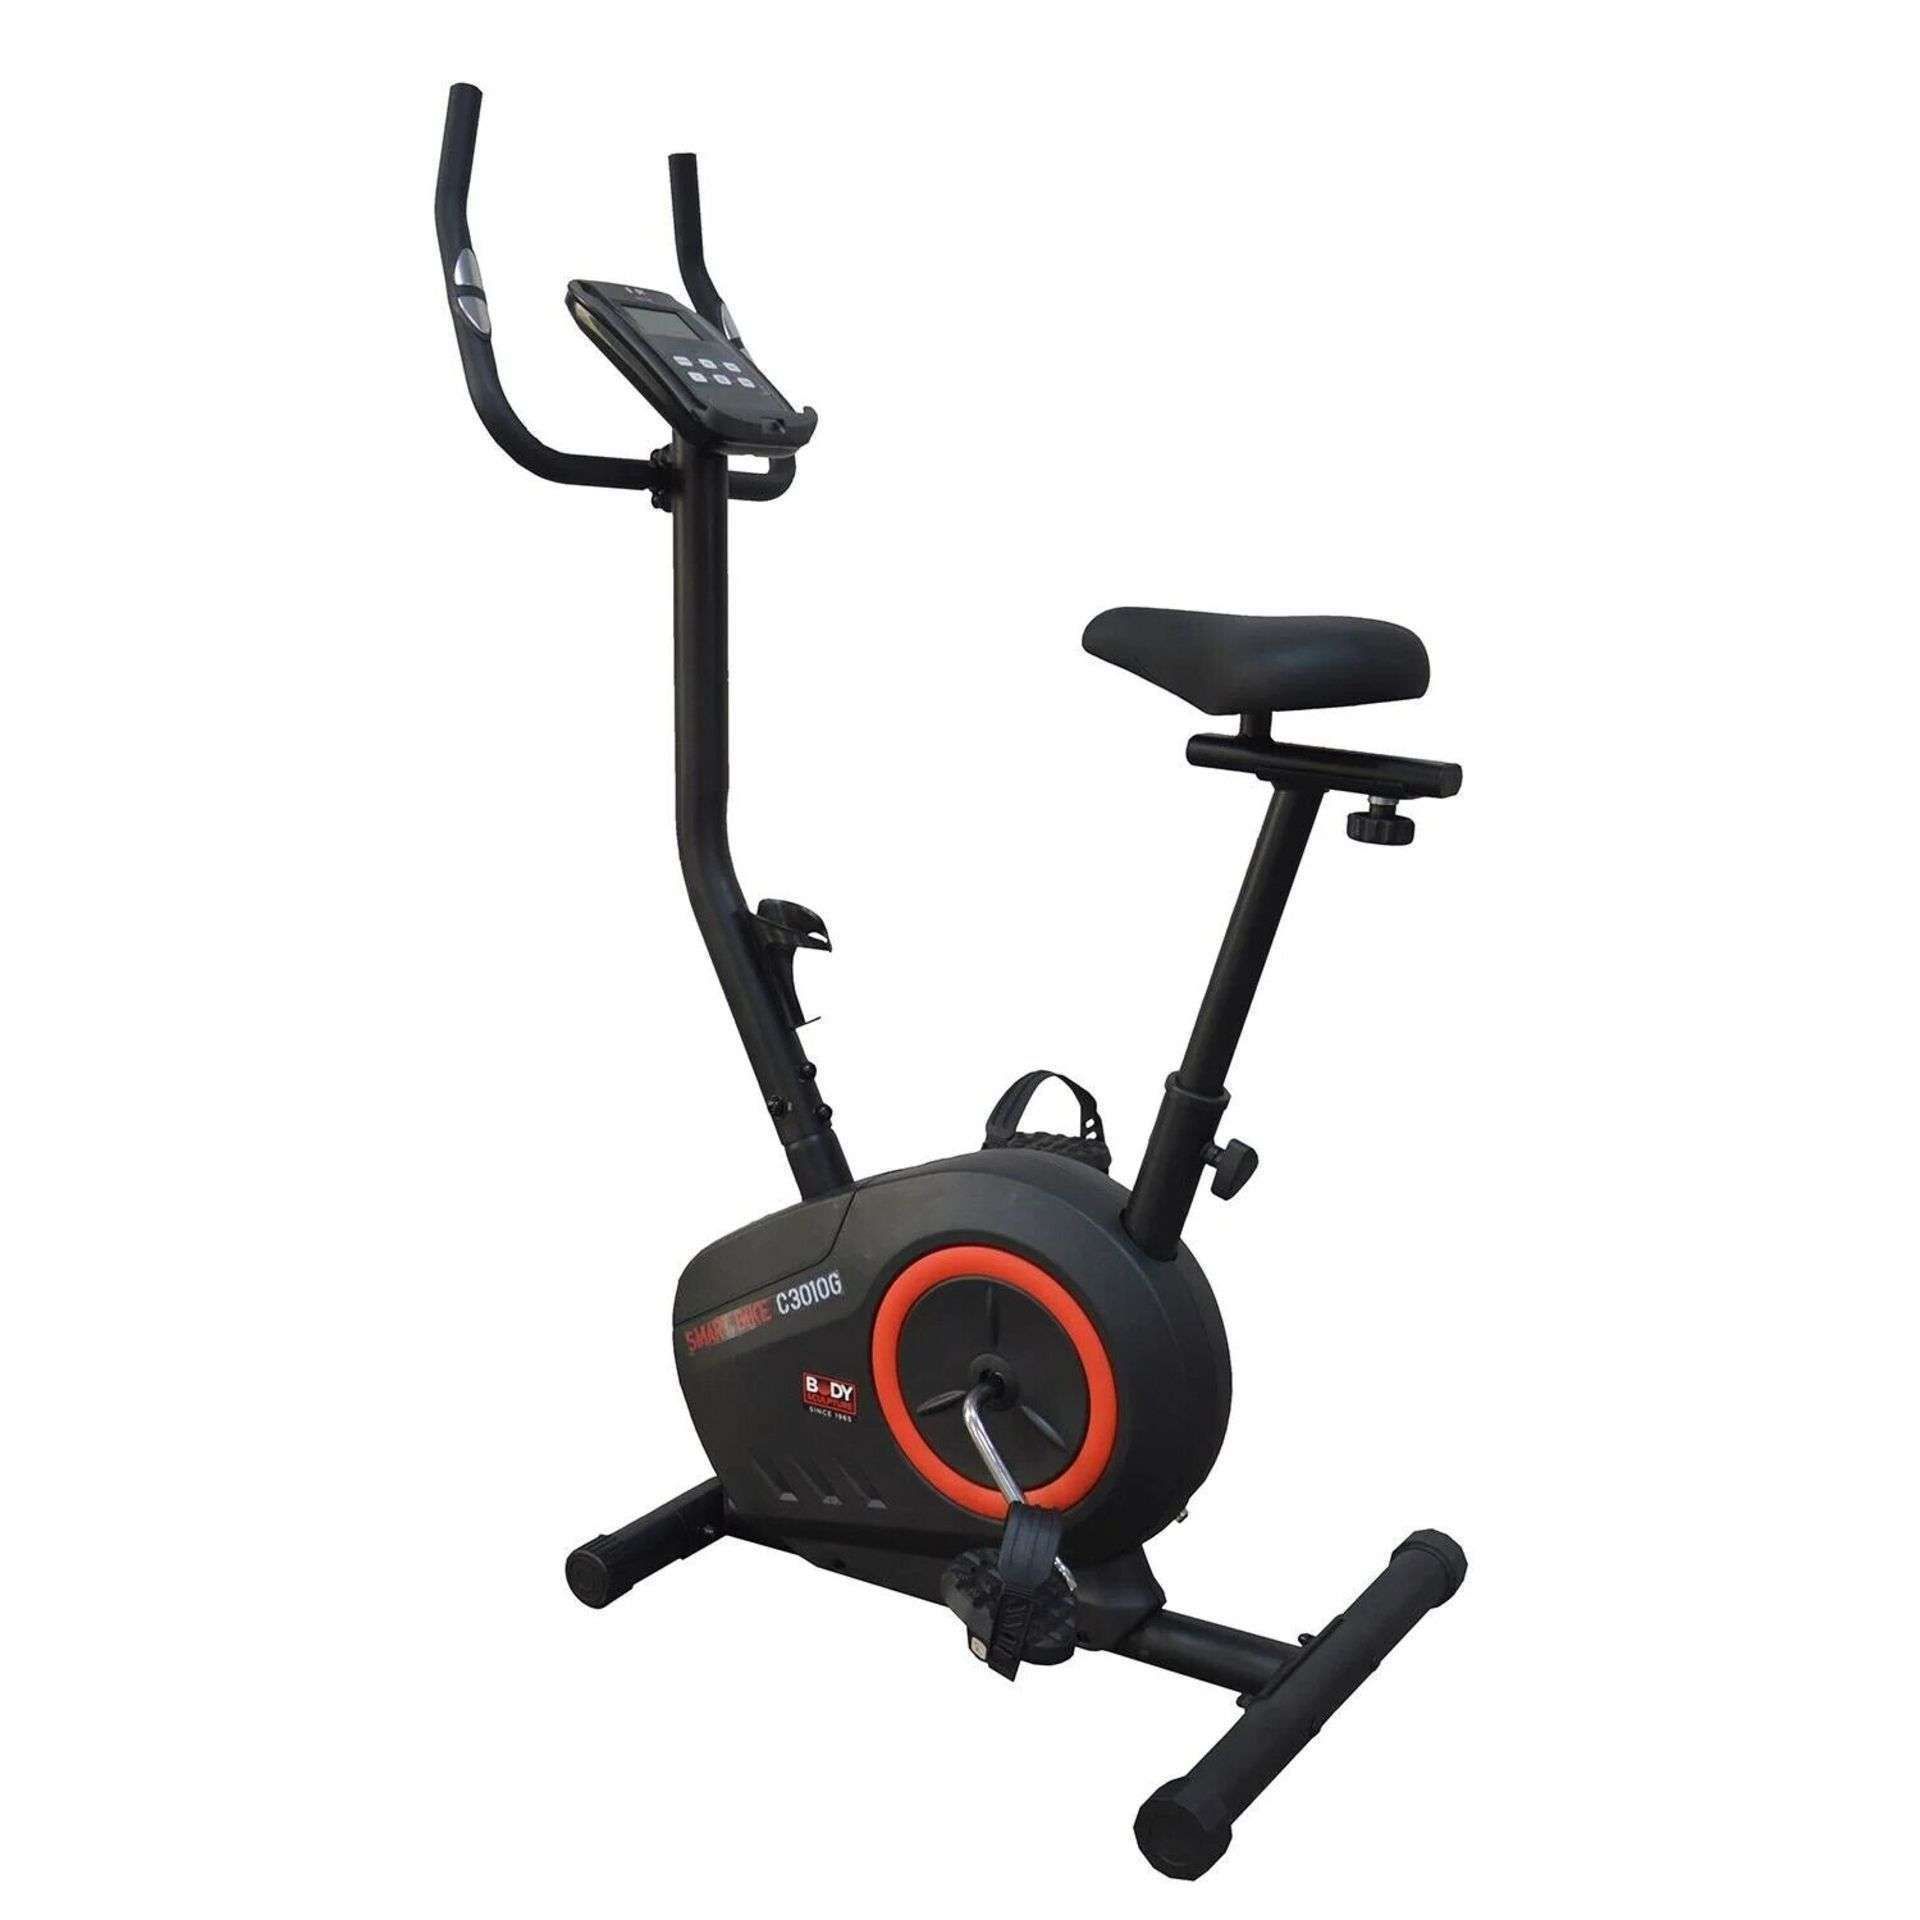 Trade Lot 6 x New & Boxed Body Sculpture Magnetic programmable Exercise Bike. RRP £360 each. Body